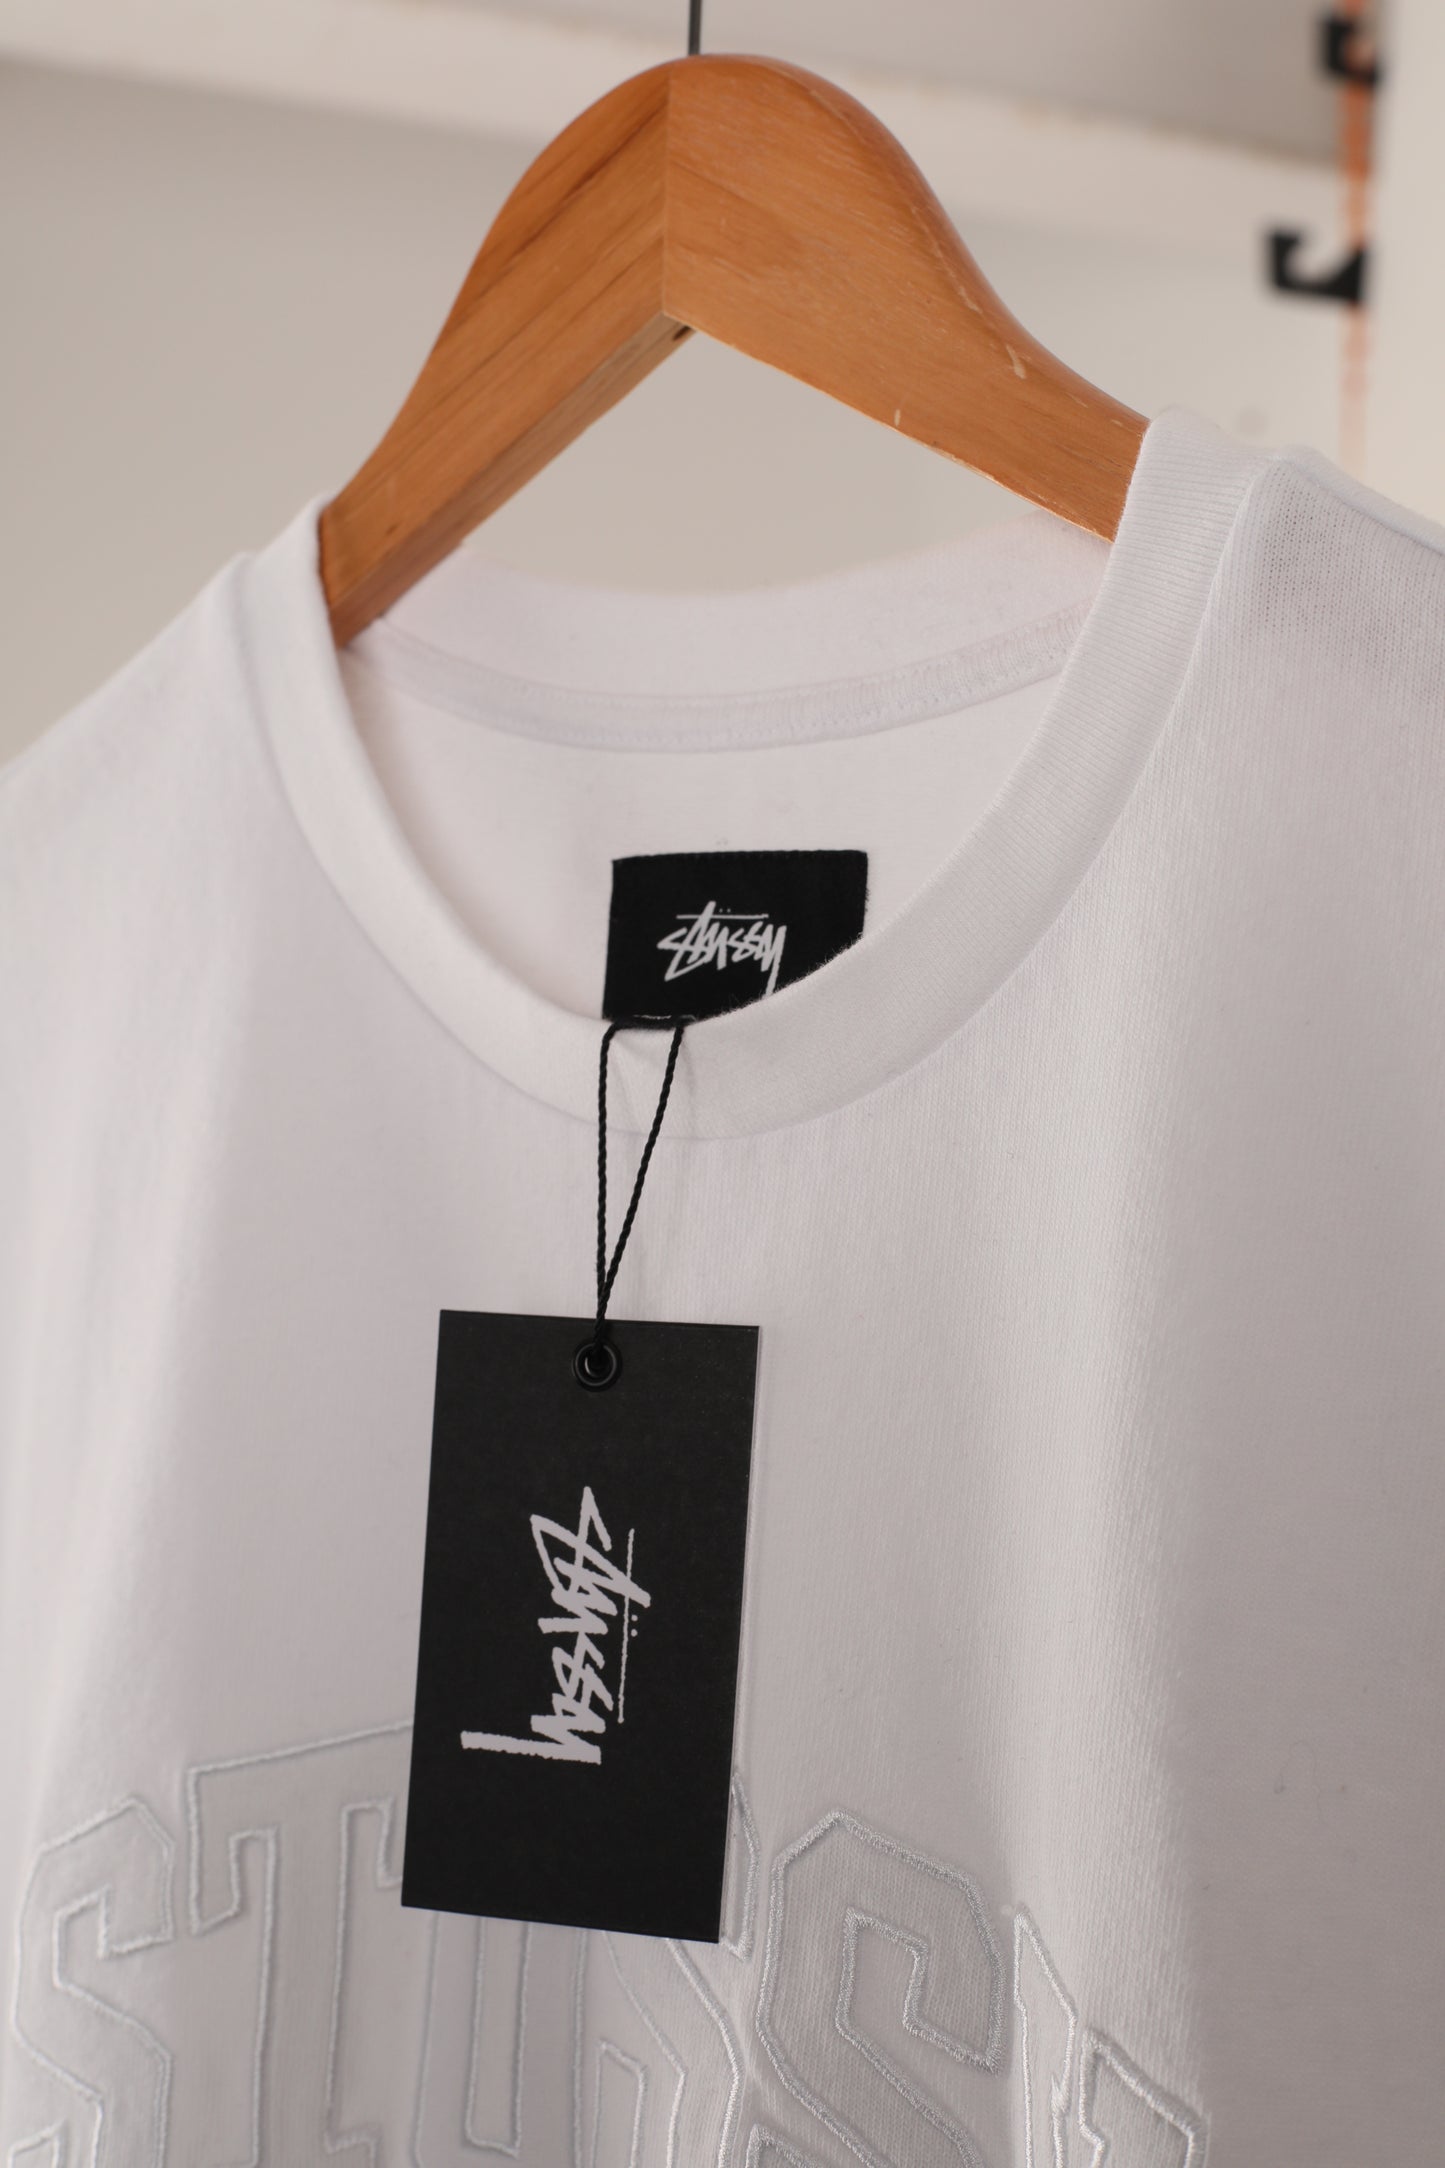 Deadstock Stussy Arch Crew tee - White (M)